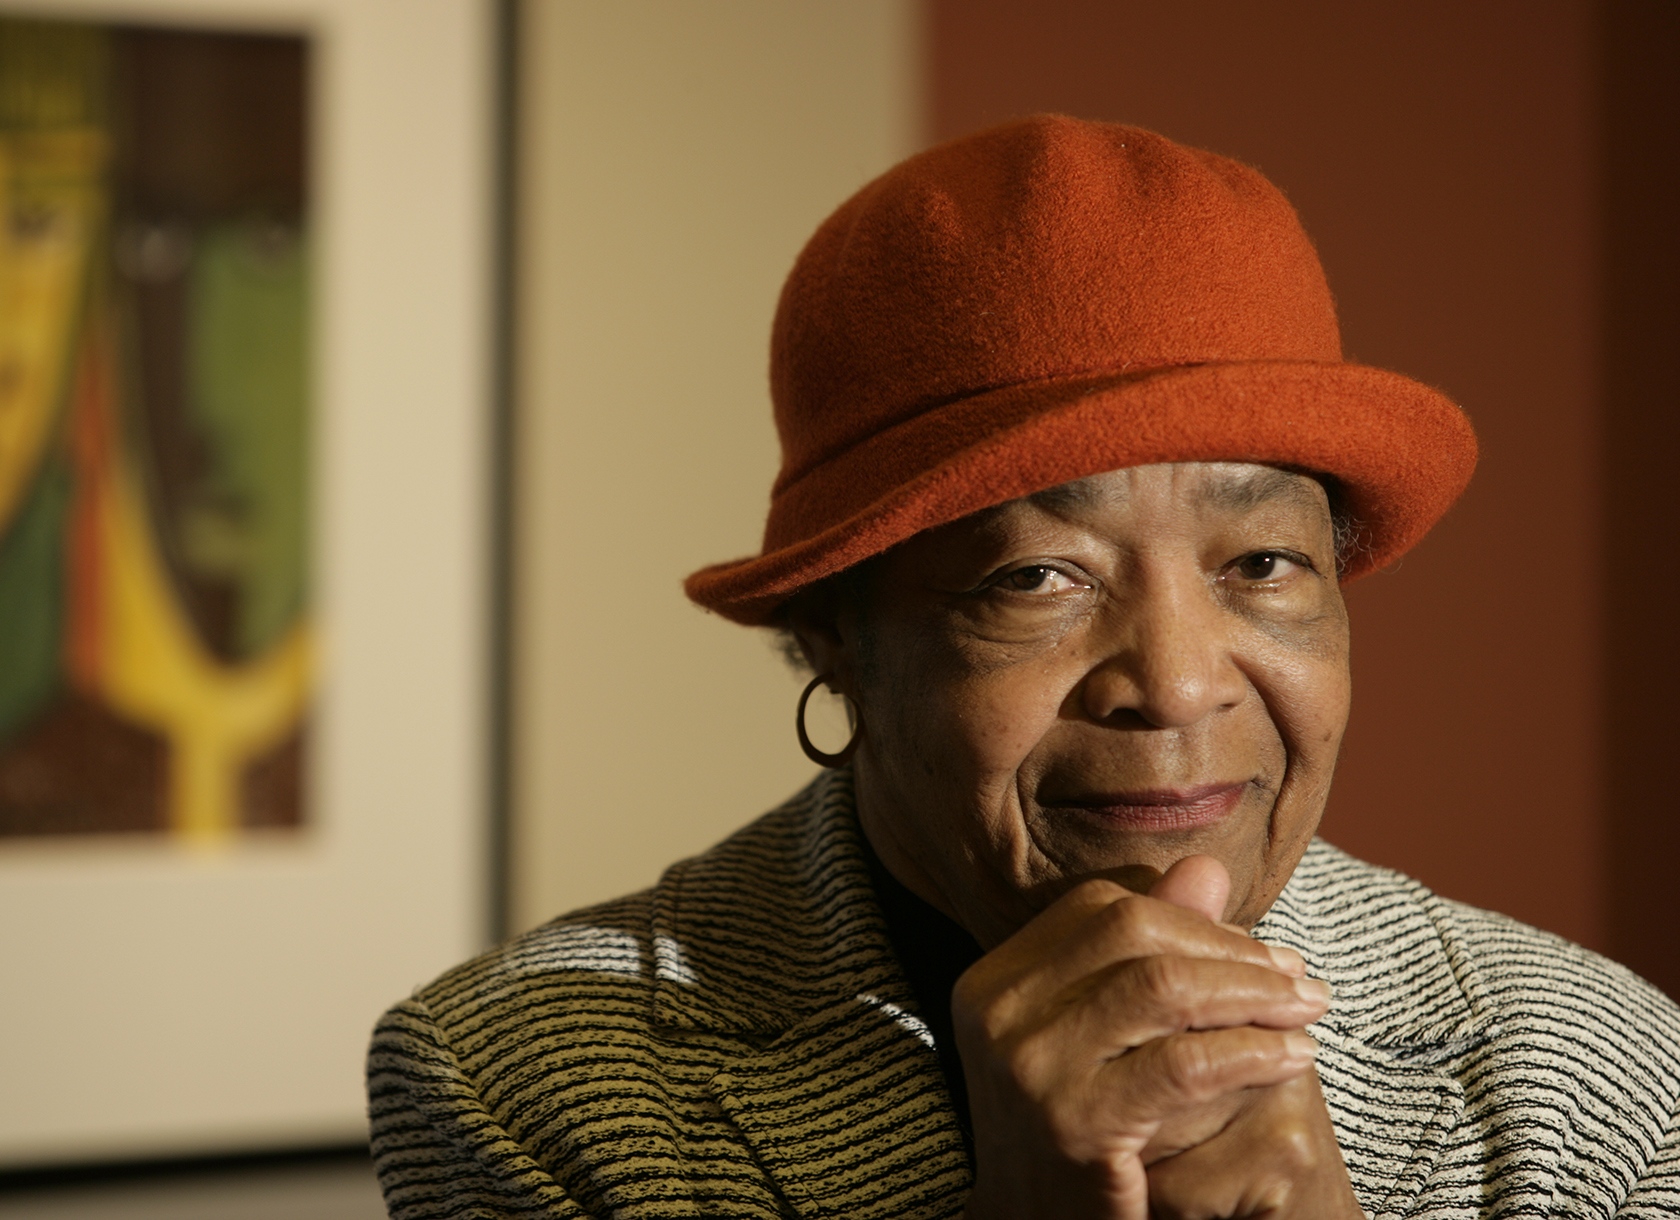 Image of Dr. Lewis, a black woman wearing a red hat